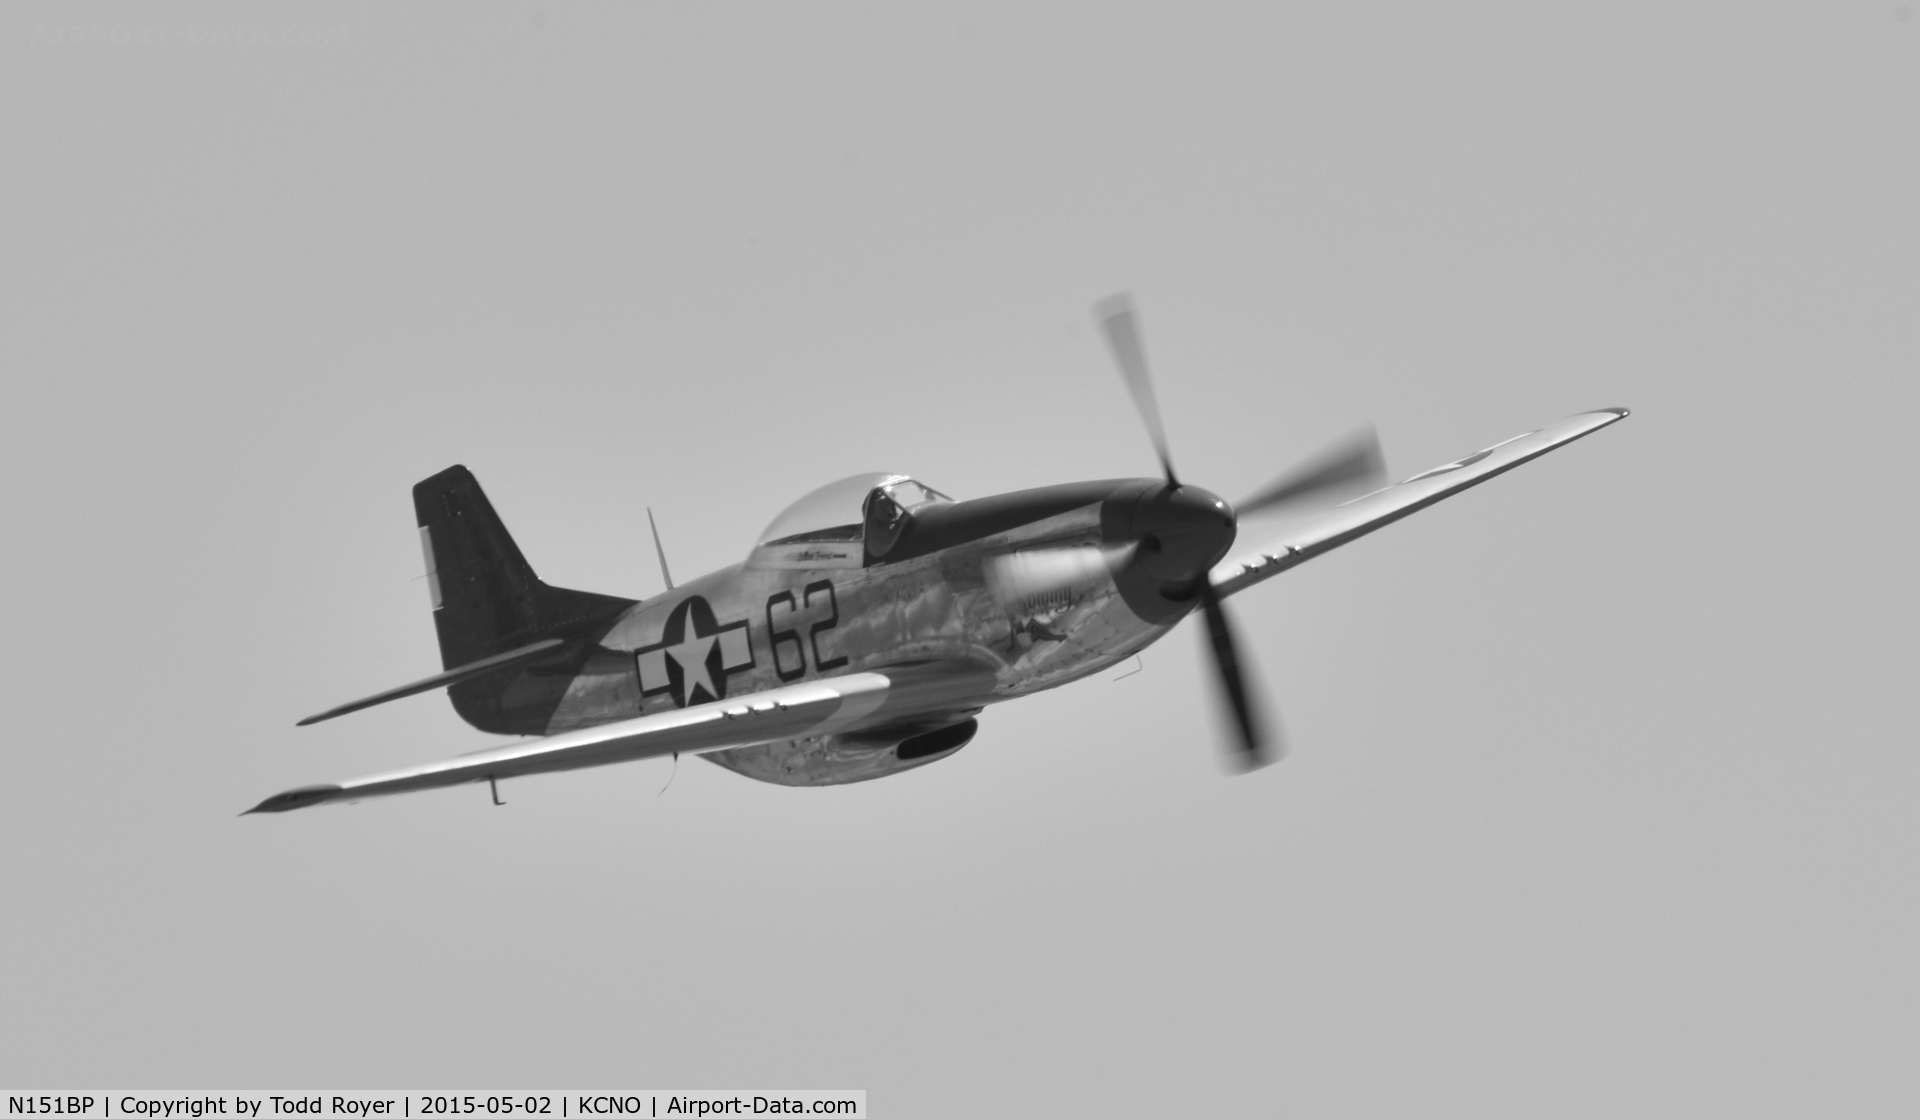 N151BP, 1944 North American P-51D Mustang C/N 122-41448, Flying at the Planes of Fame Airshow